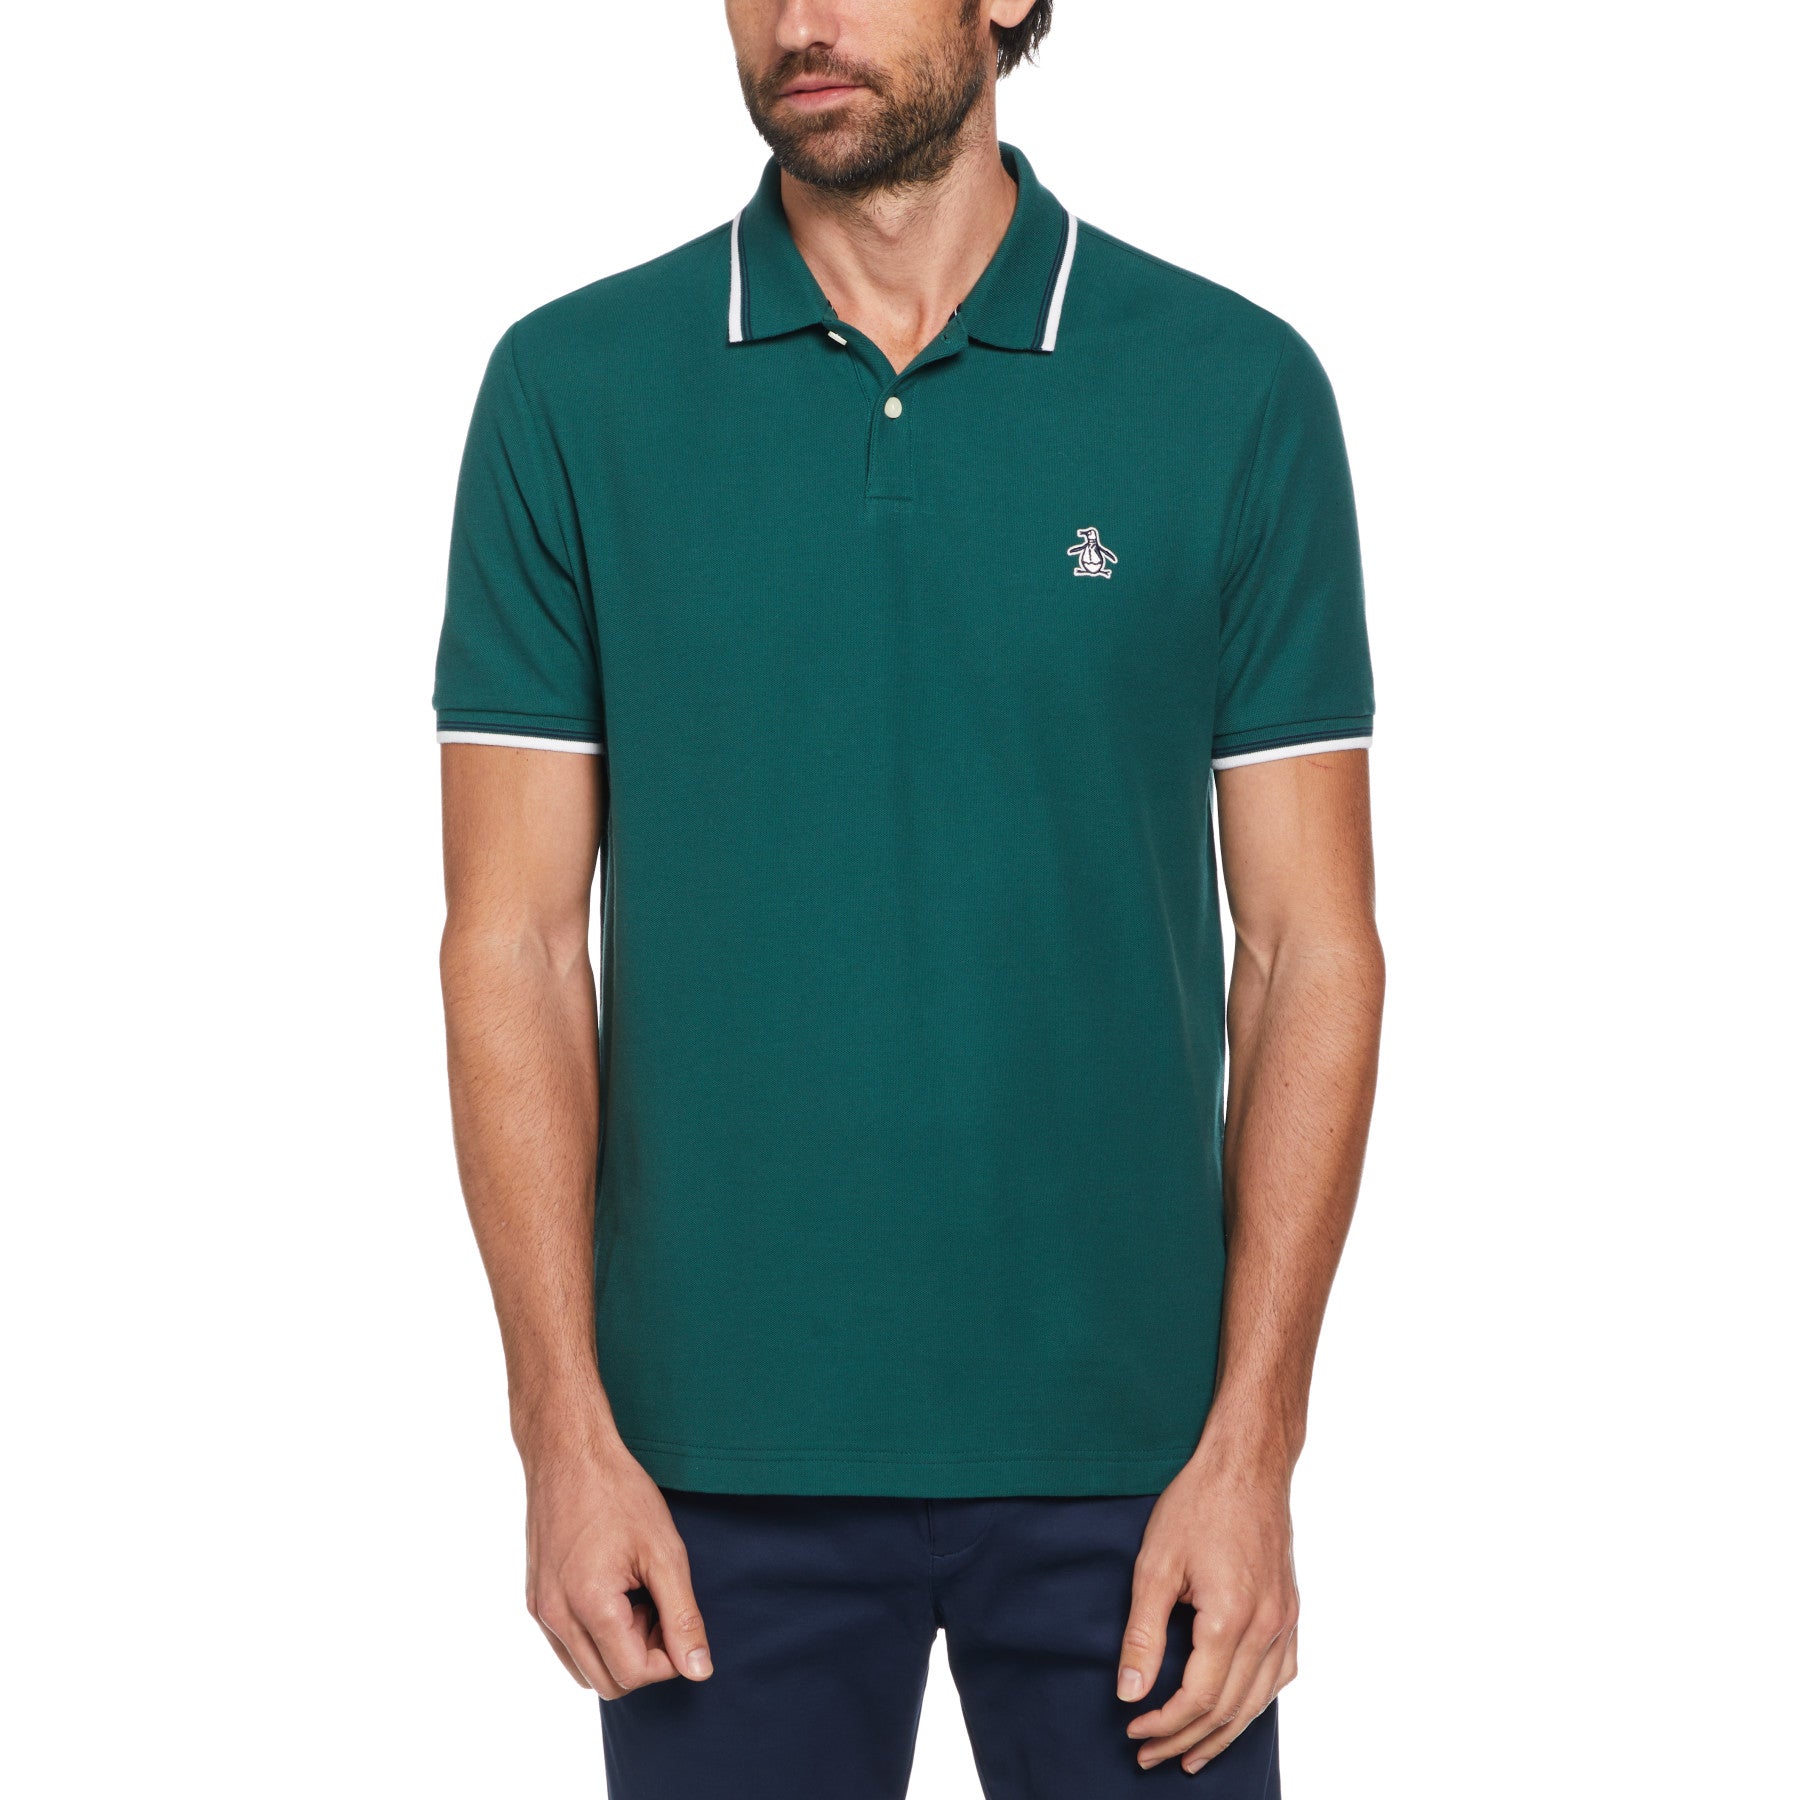 View Tipped Sticker Pete Polo Shirt In June Bug information